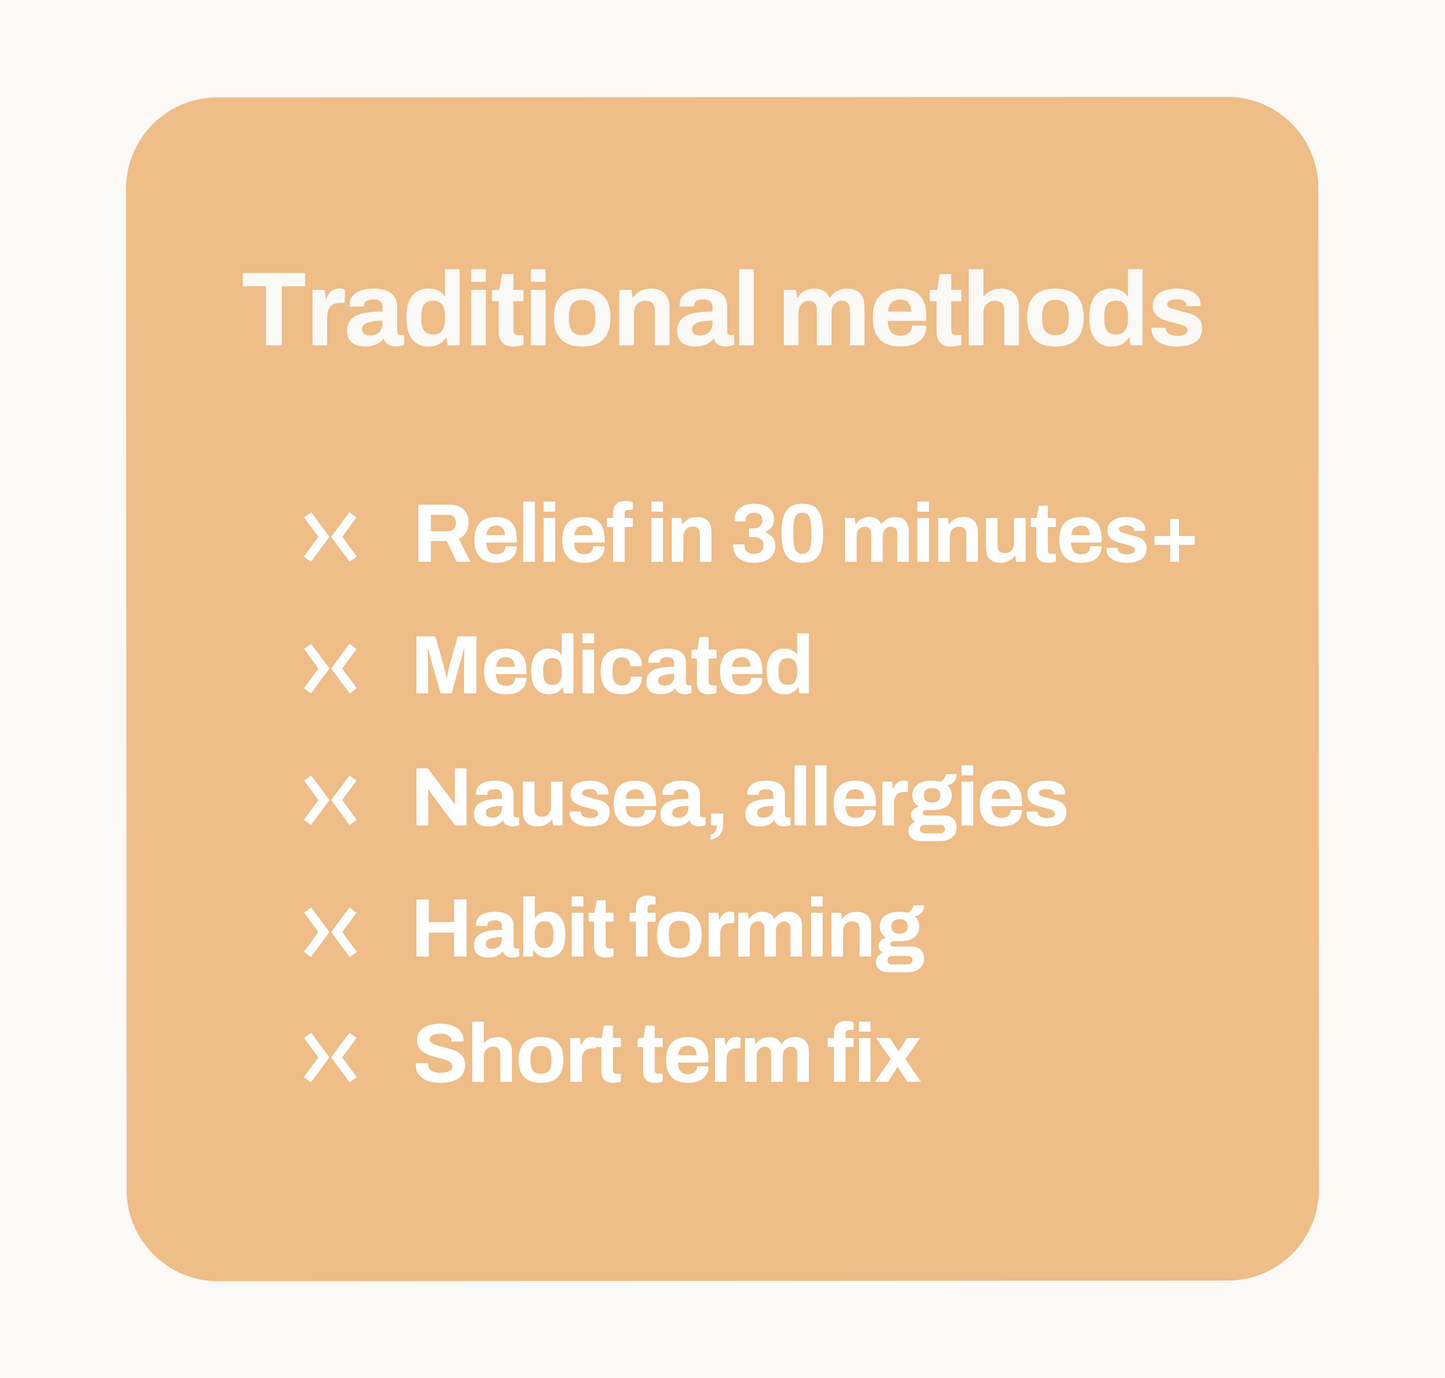 Traditional methods of period pain relief